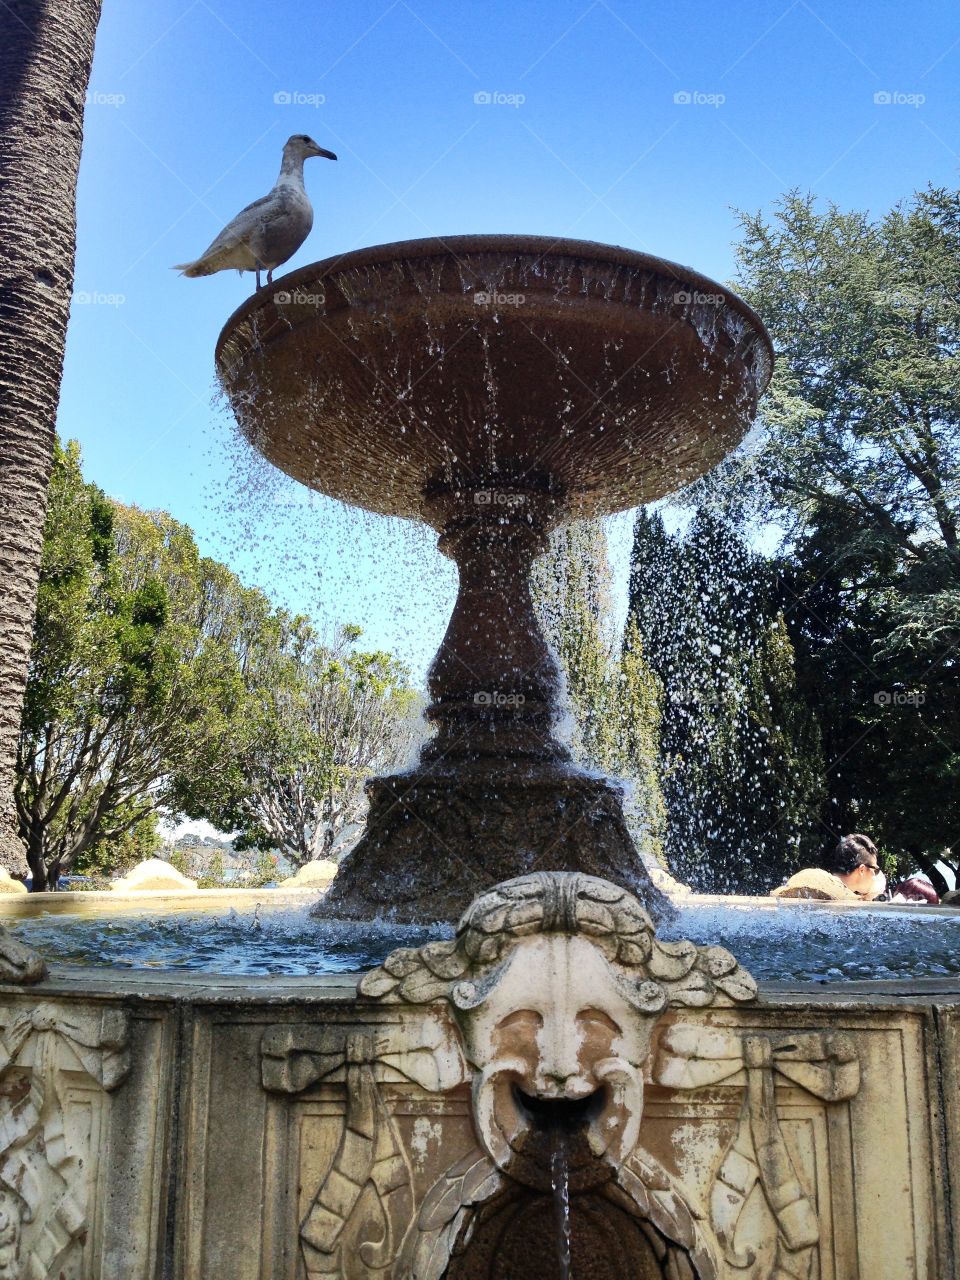 Seagull perched on a fountain